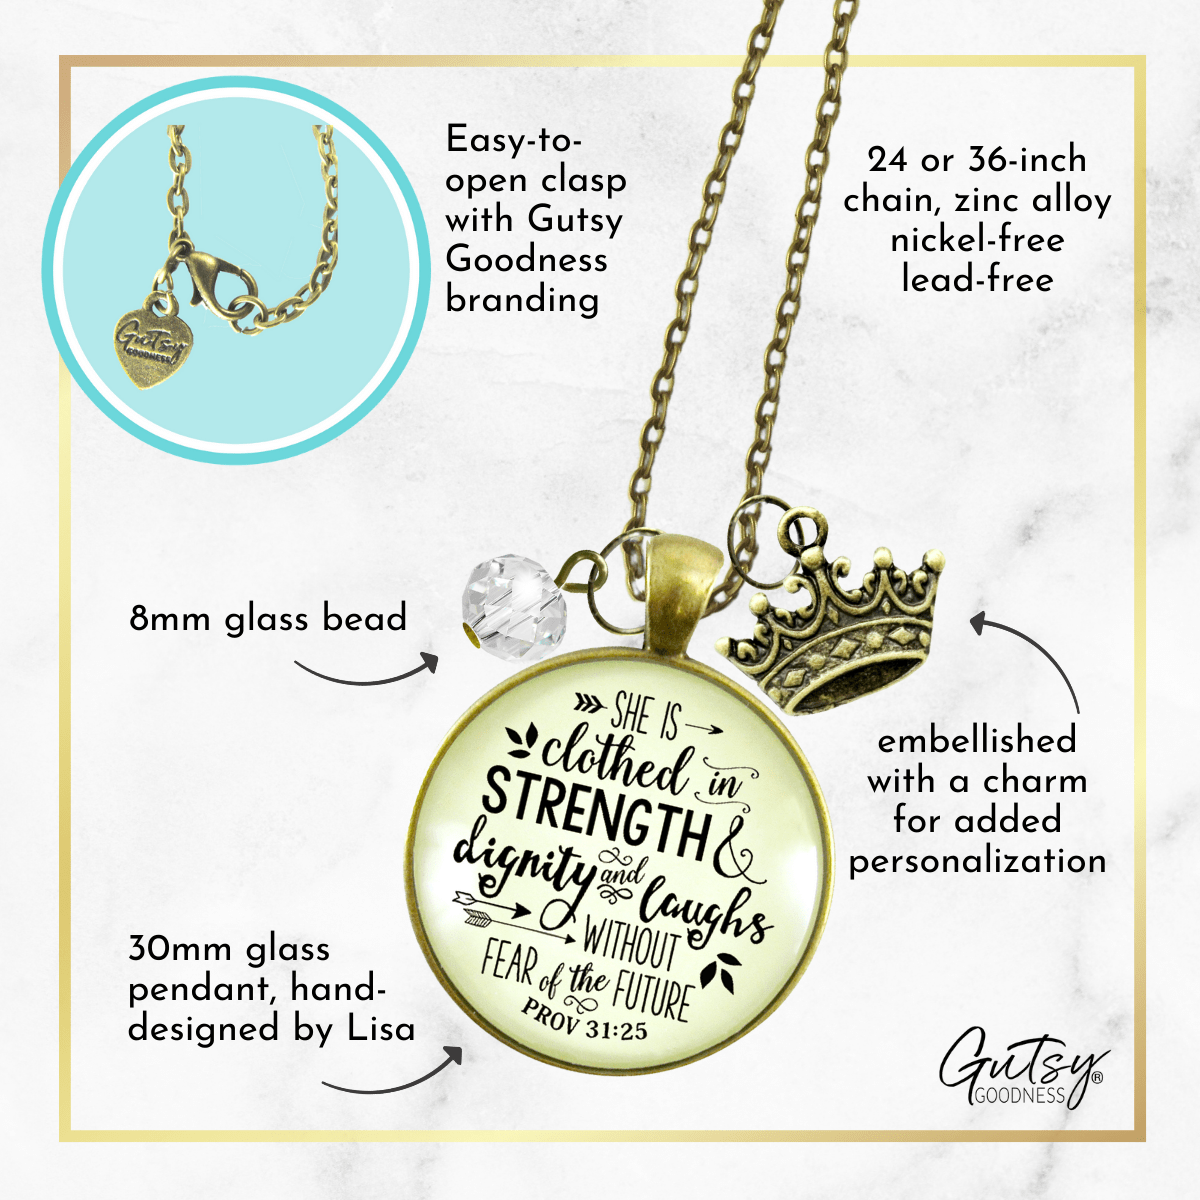 Gutsy Goodness Faith Necklace She Clothed Strength Dignity Jewelry Message Proverb 31 Crown Gift - Gutsy Goodness Handmade Jewelry;Faith Necklace She Clothed Strength Dignity Jewelry Message Proverb 31 Crown Gift - Gutsy Goodness Handmade Jewelry Gifts